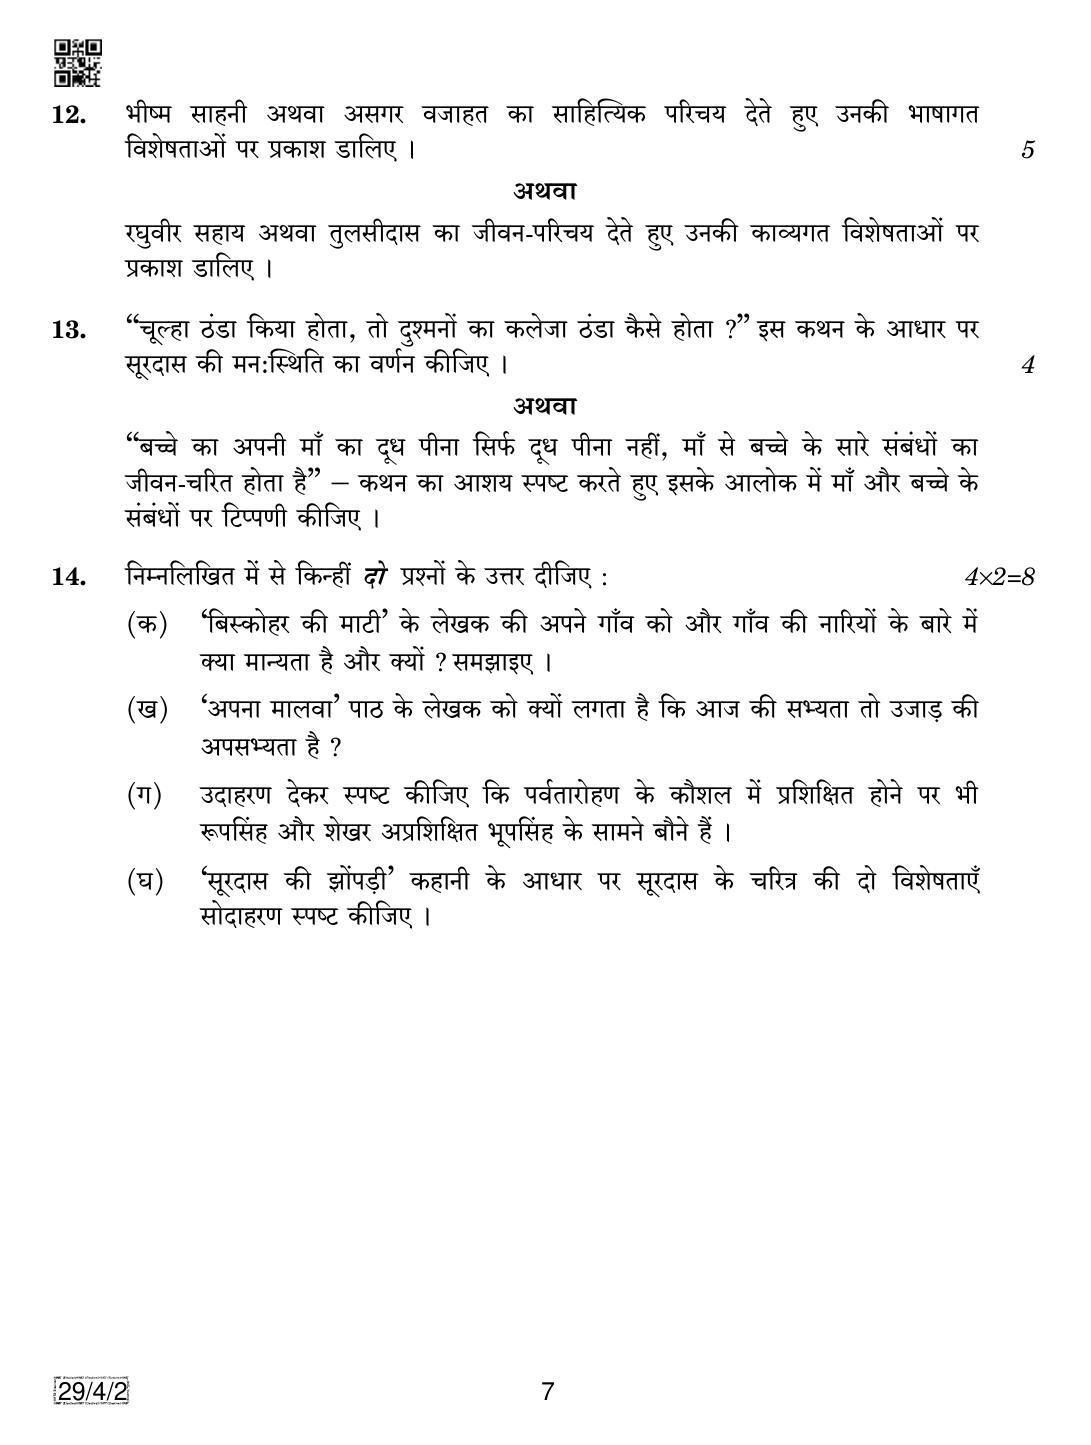 CBSE Class 12 29-4-2 Hindi Elective 2019 Question Paper - Page 7